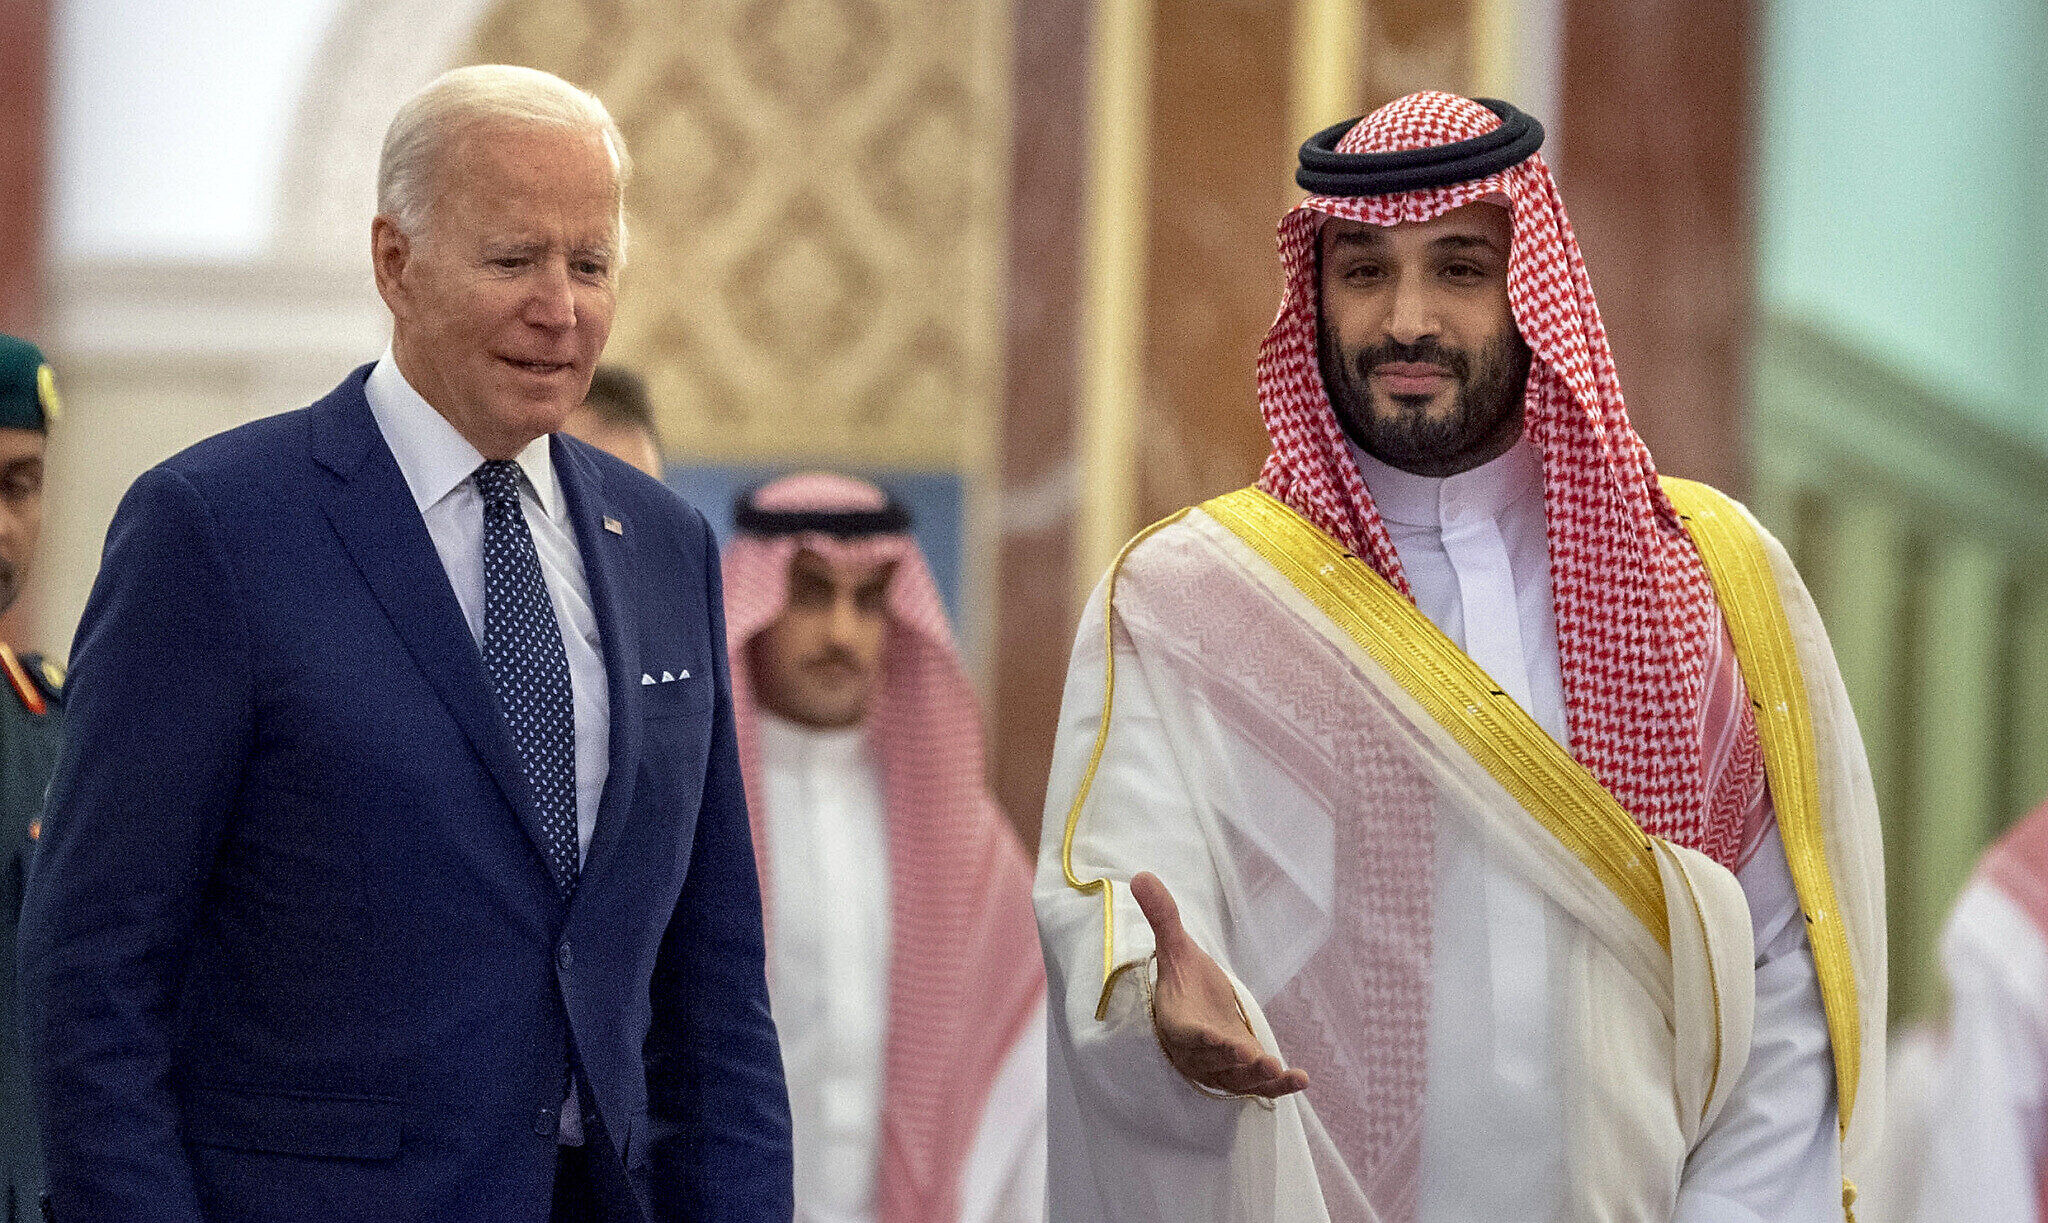 Saudi Arab Download X Video - Saudi crown prince indicates Israel normalization can resume after war -  White House | The Times of Israel